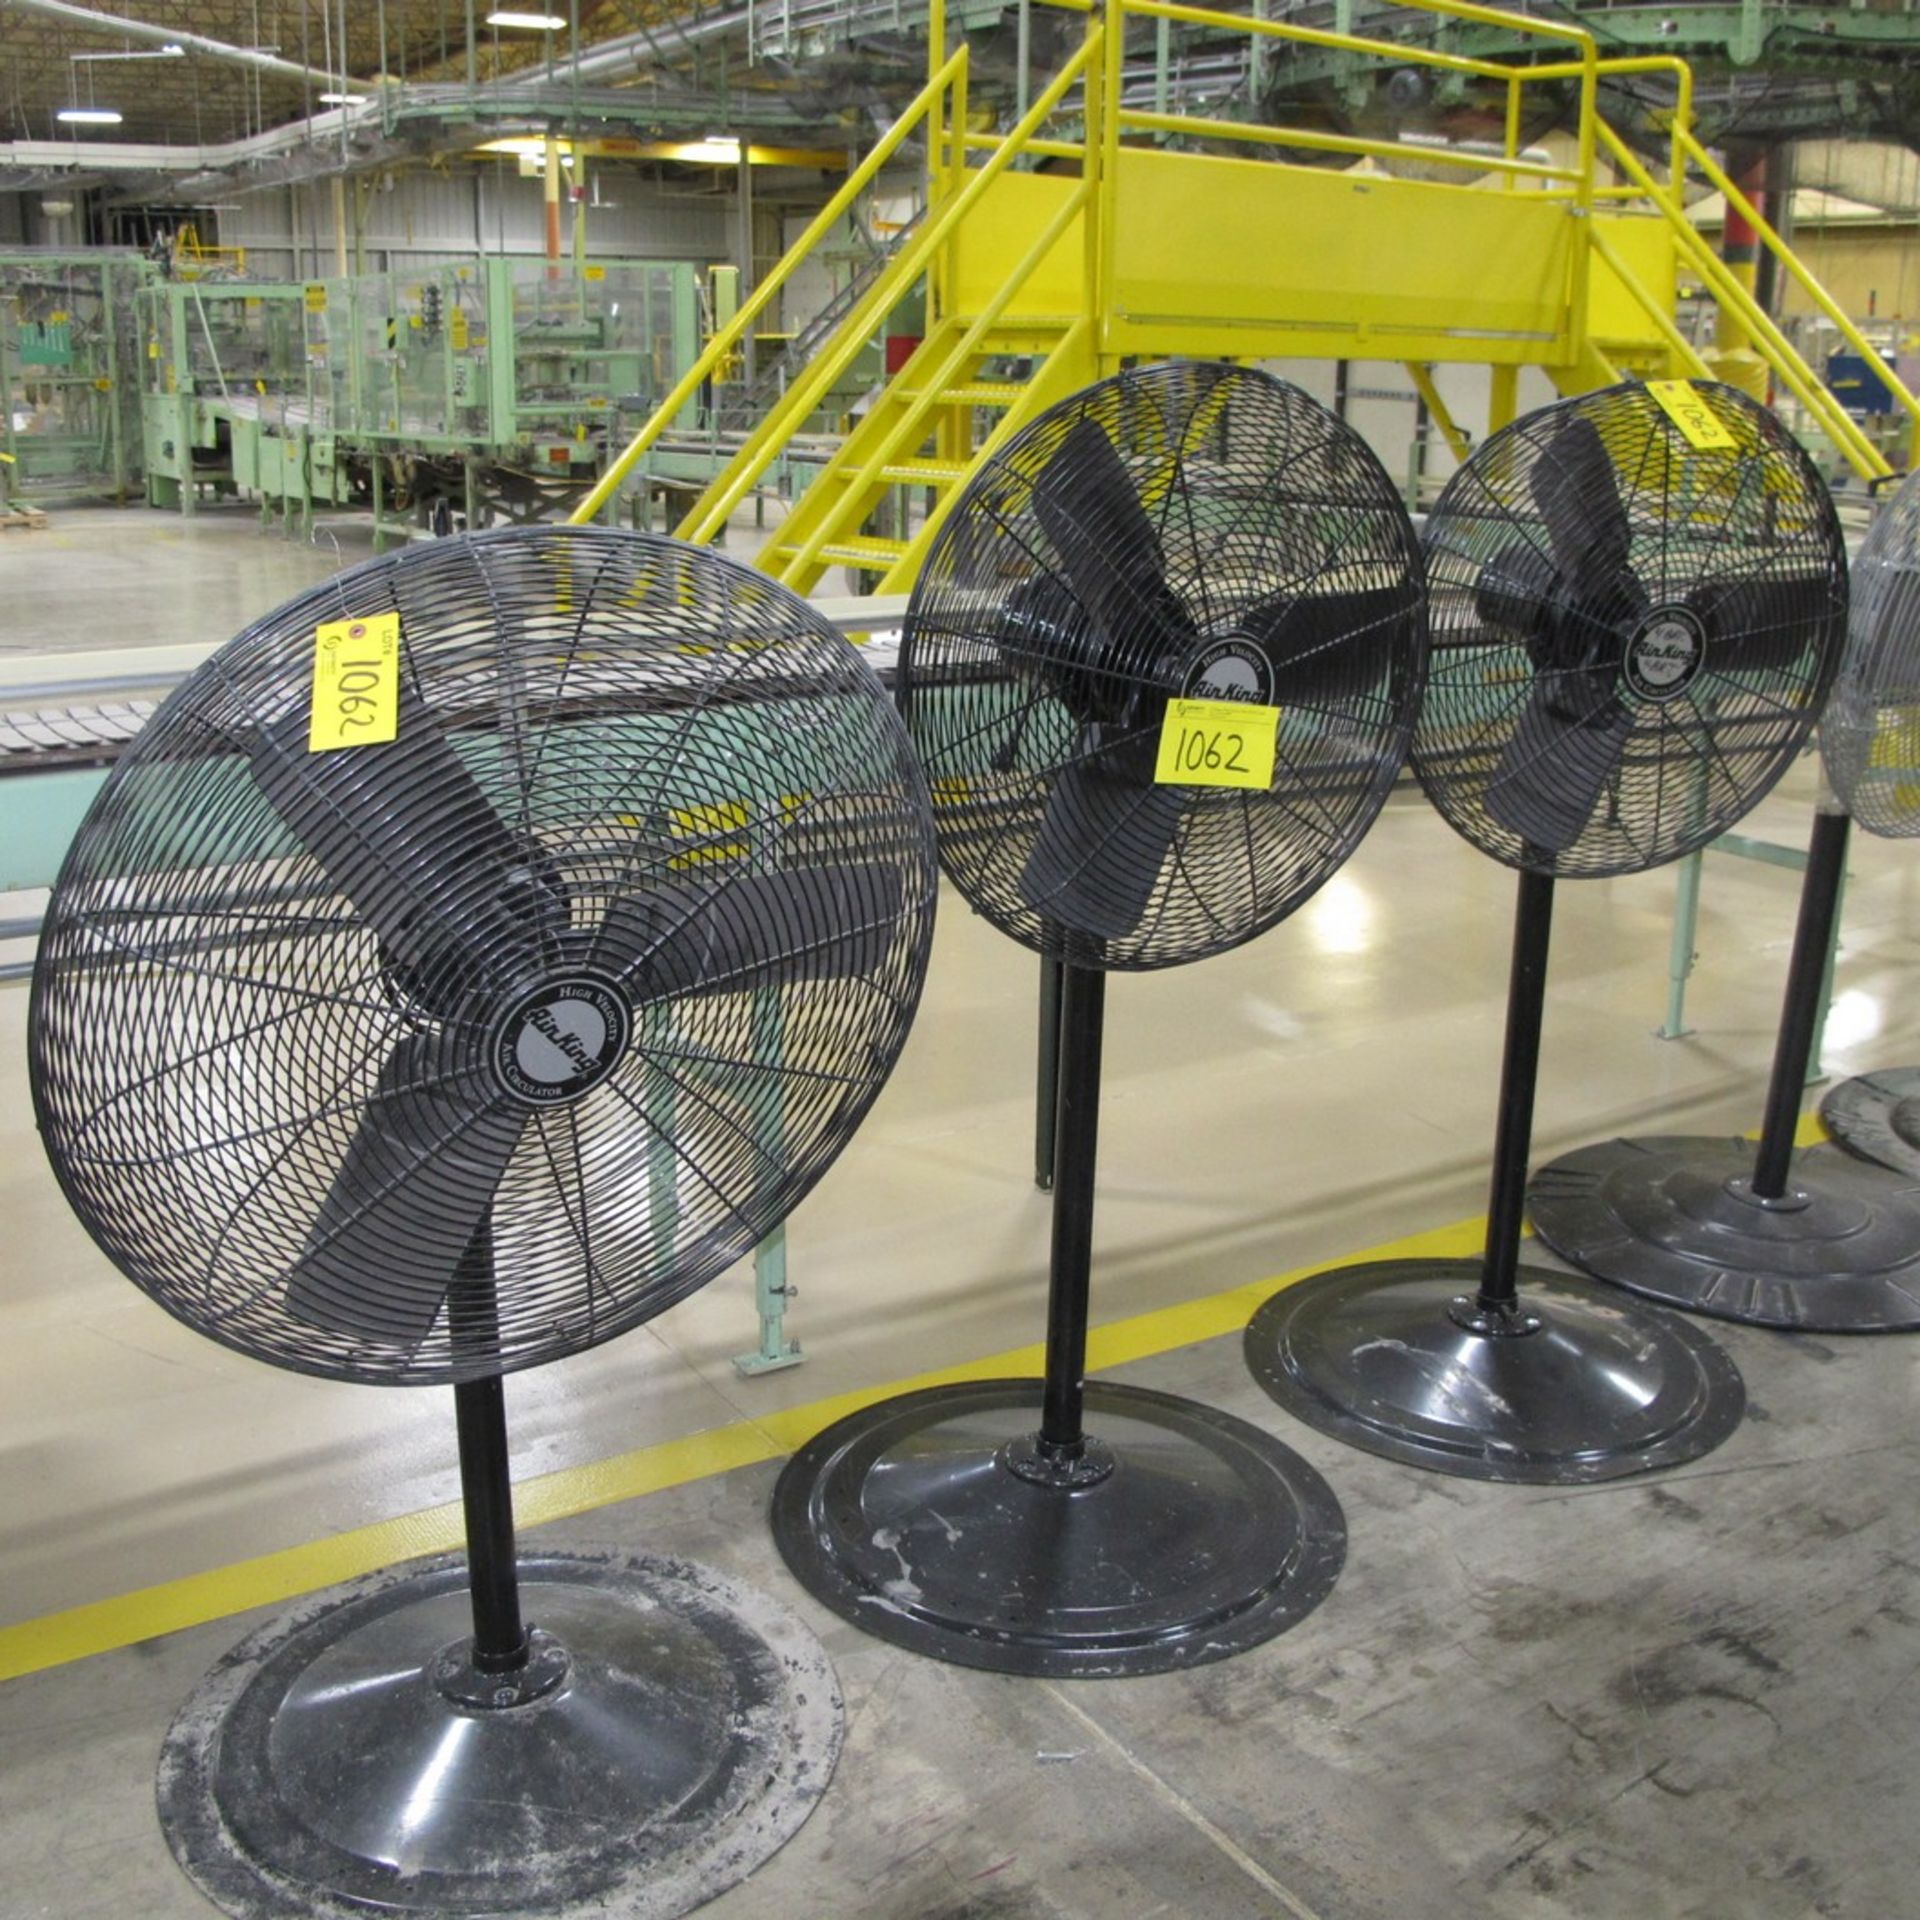 LOT OF (3) AIR KING INDUSTRIAL PEDESTAL FANS W/ ADJUSTABLE HEIGHT (NORTH CENTER PLANT)